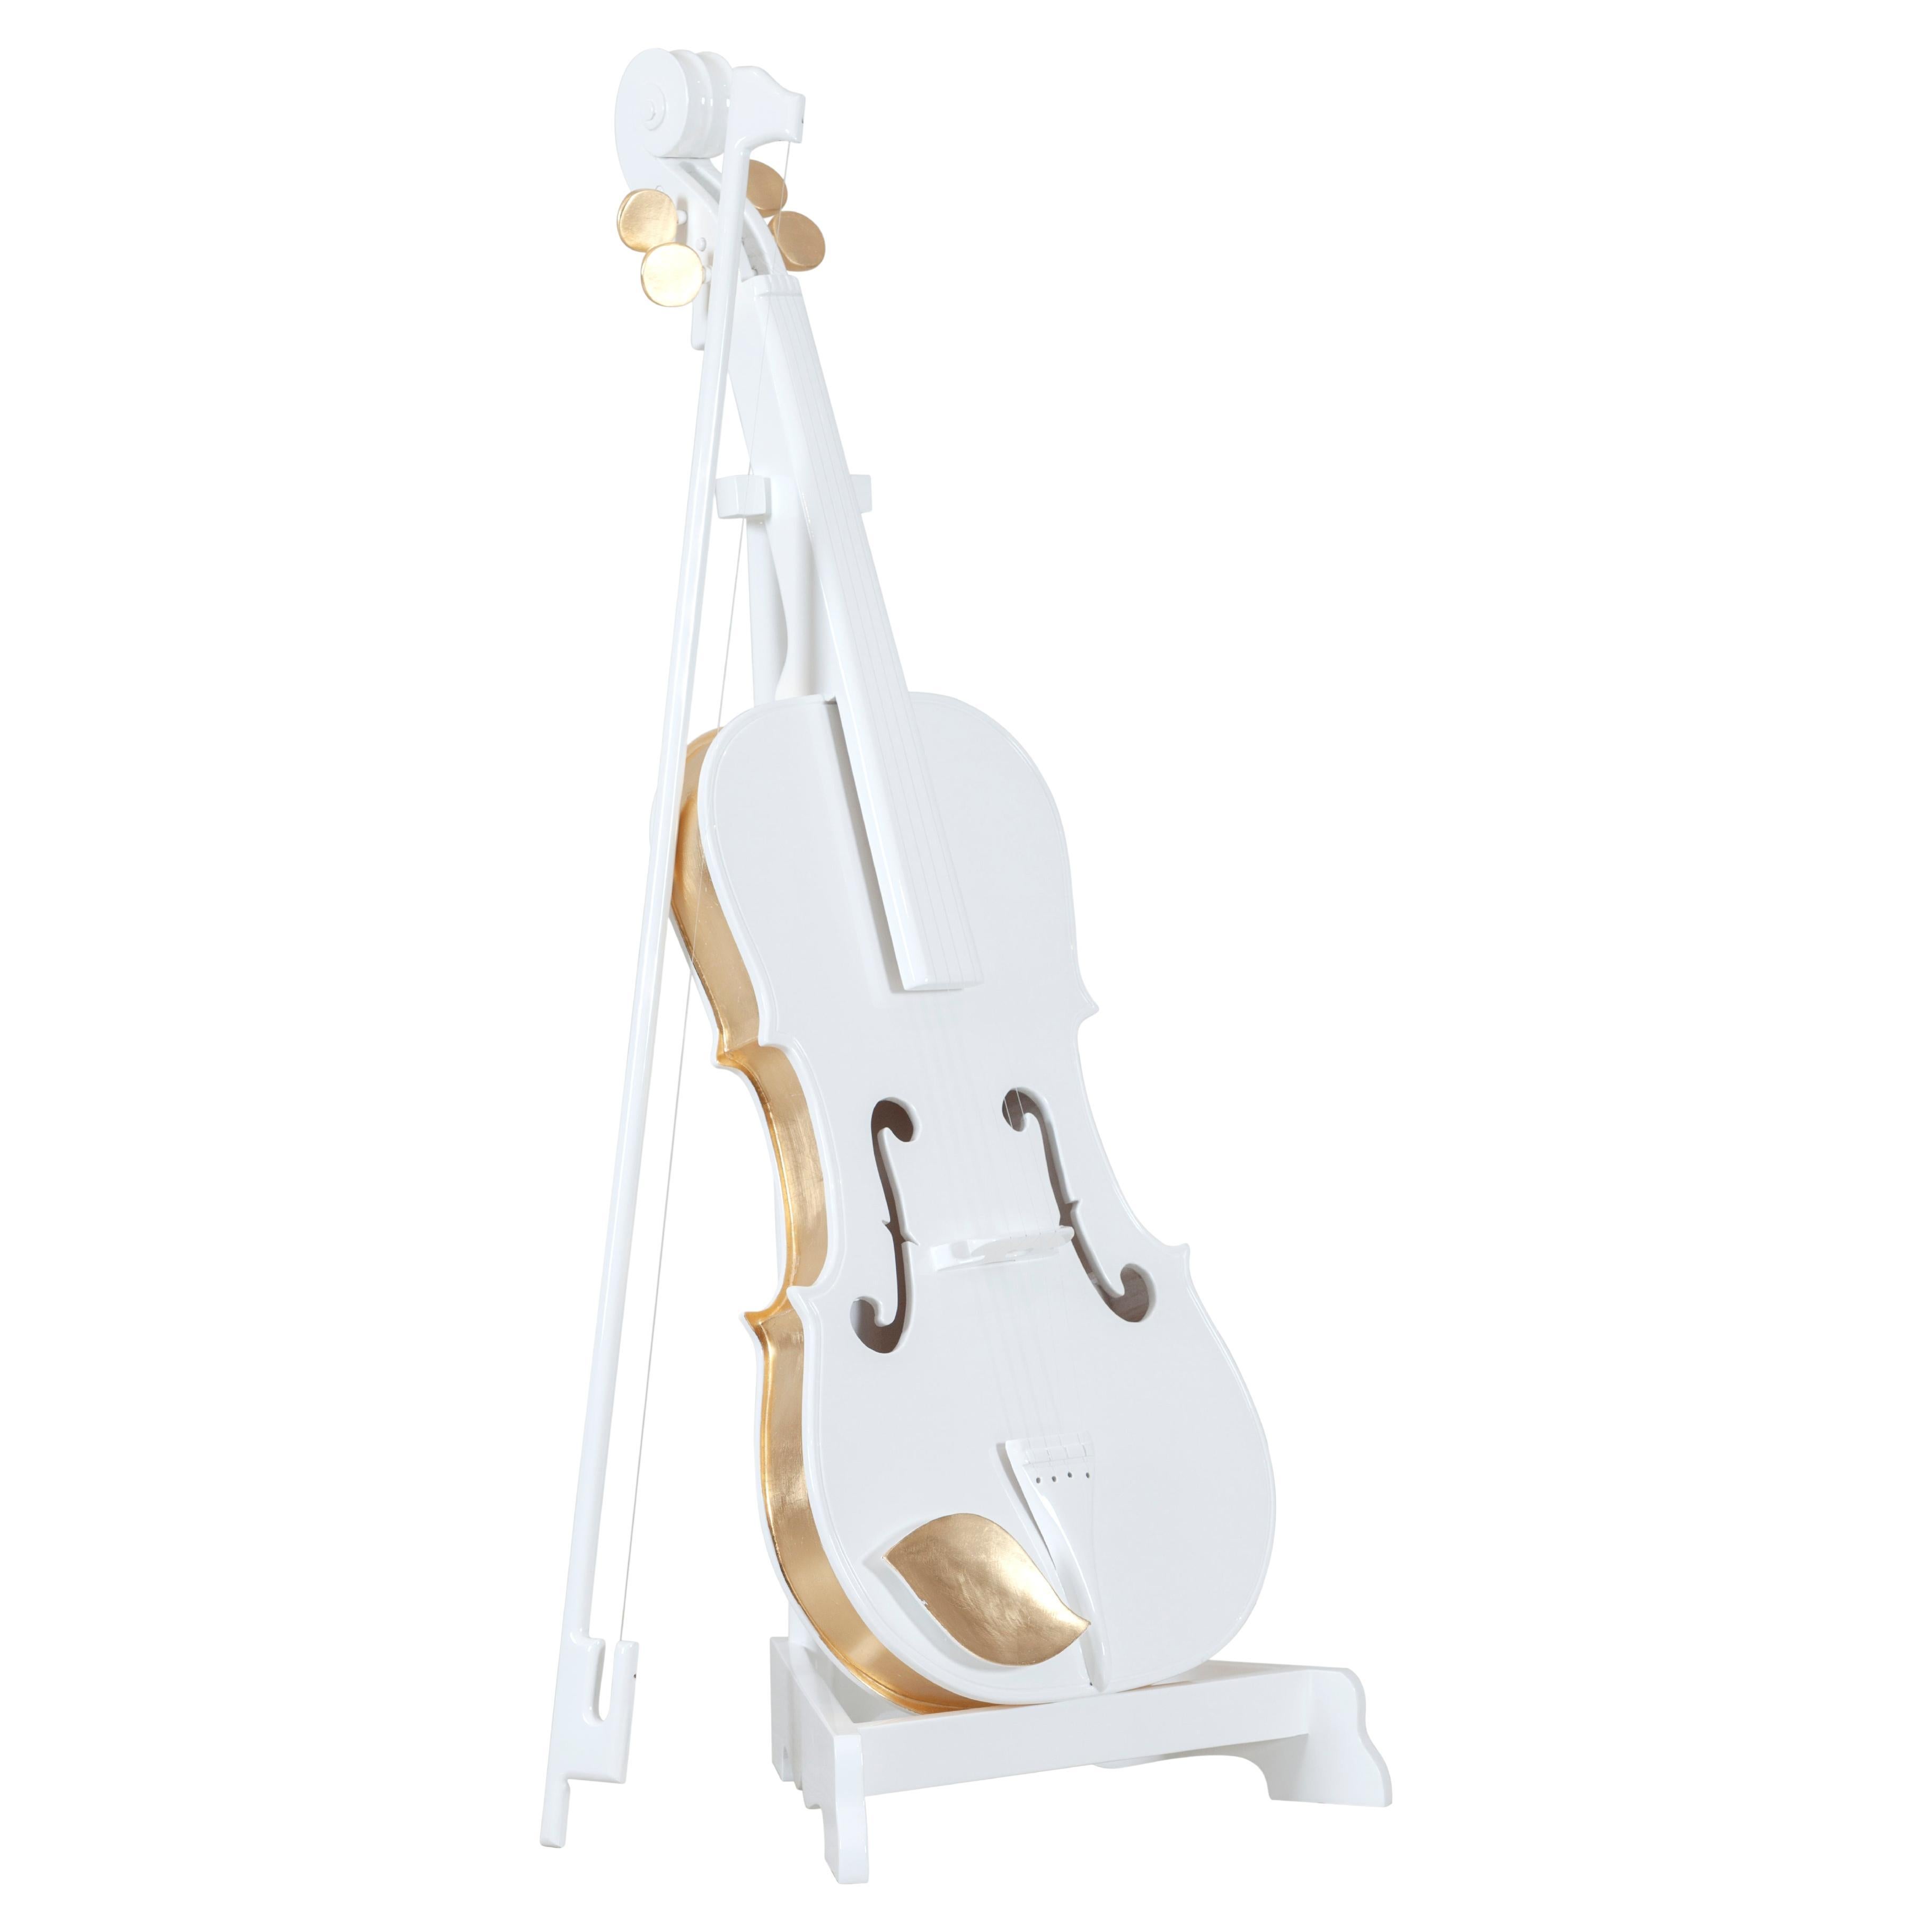 Decorative Brahms Cello Sculpture Piece Handmade in Portugal by Lusitanus Home